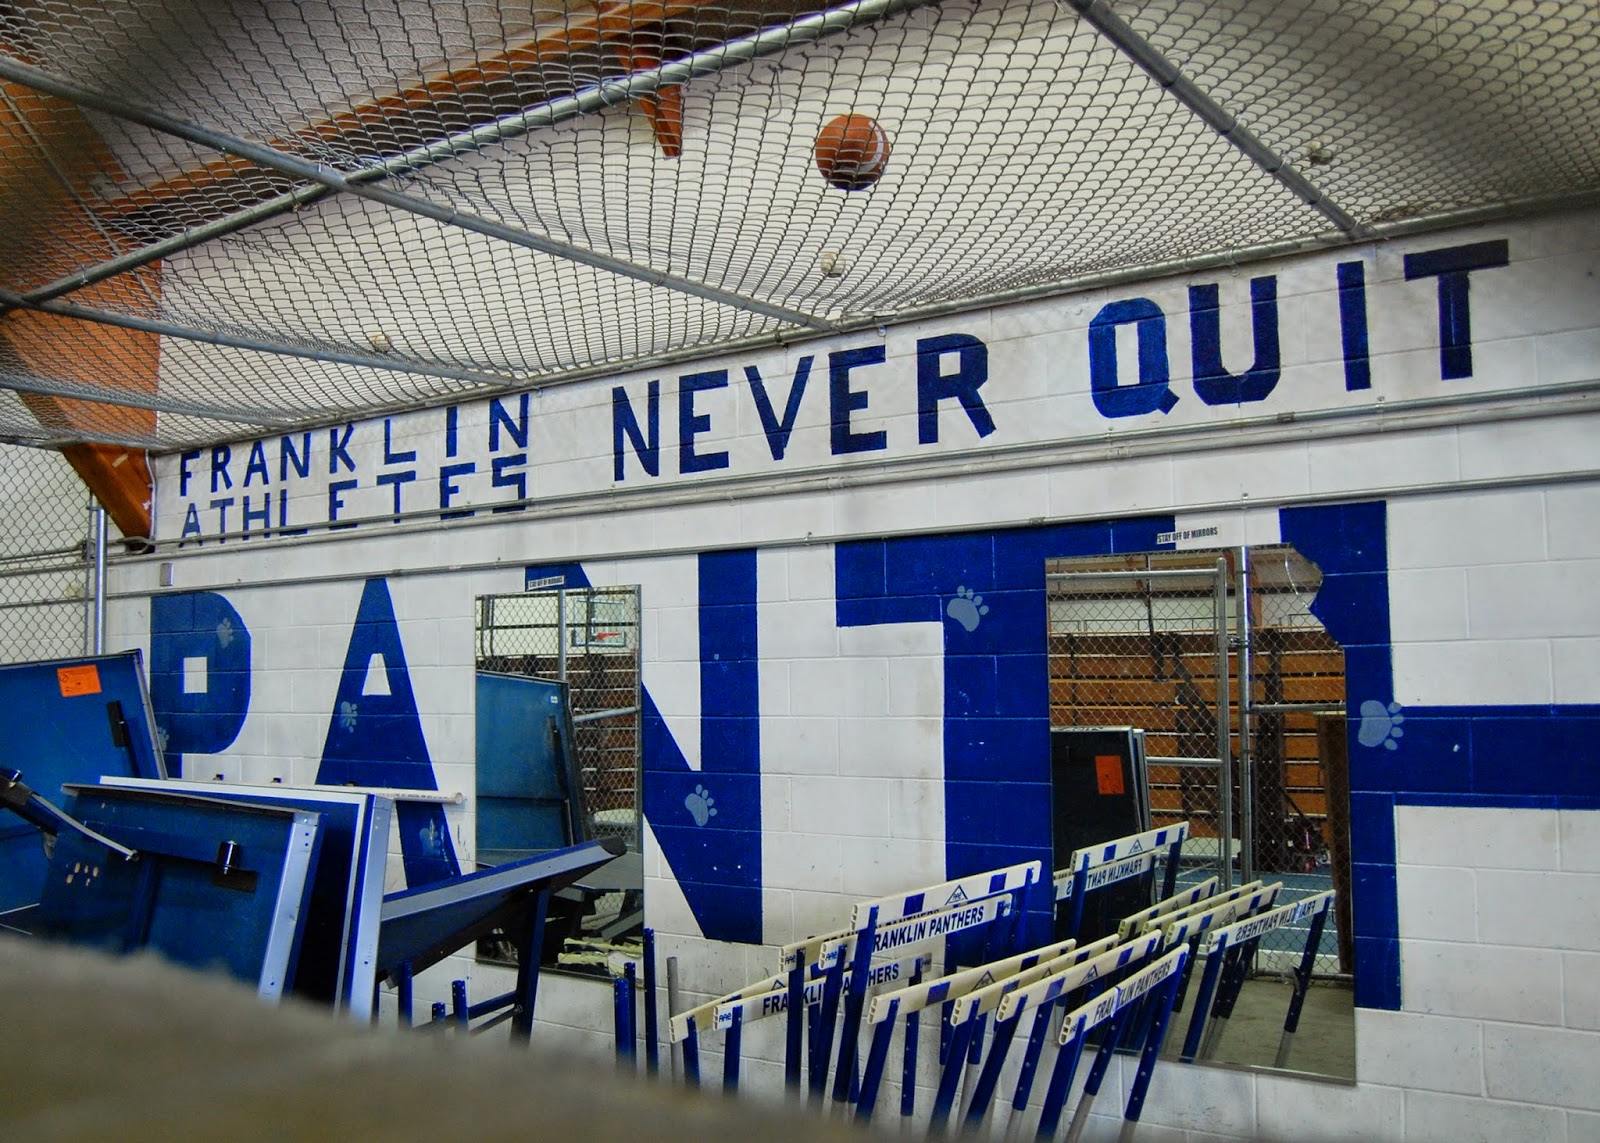 inside the field house 'cage' - "Franklin Athletes Never Quit"